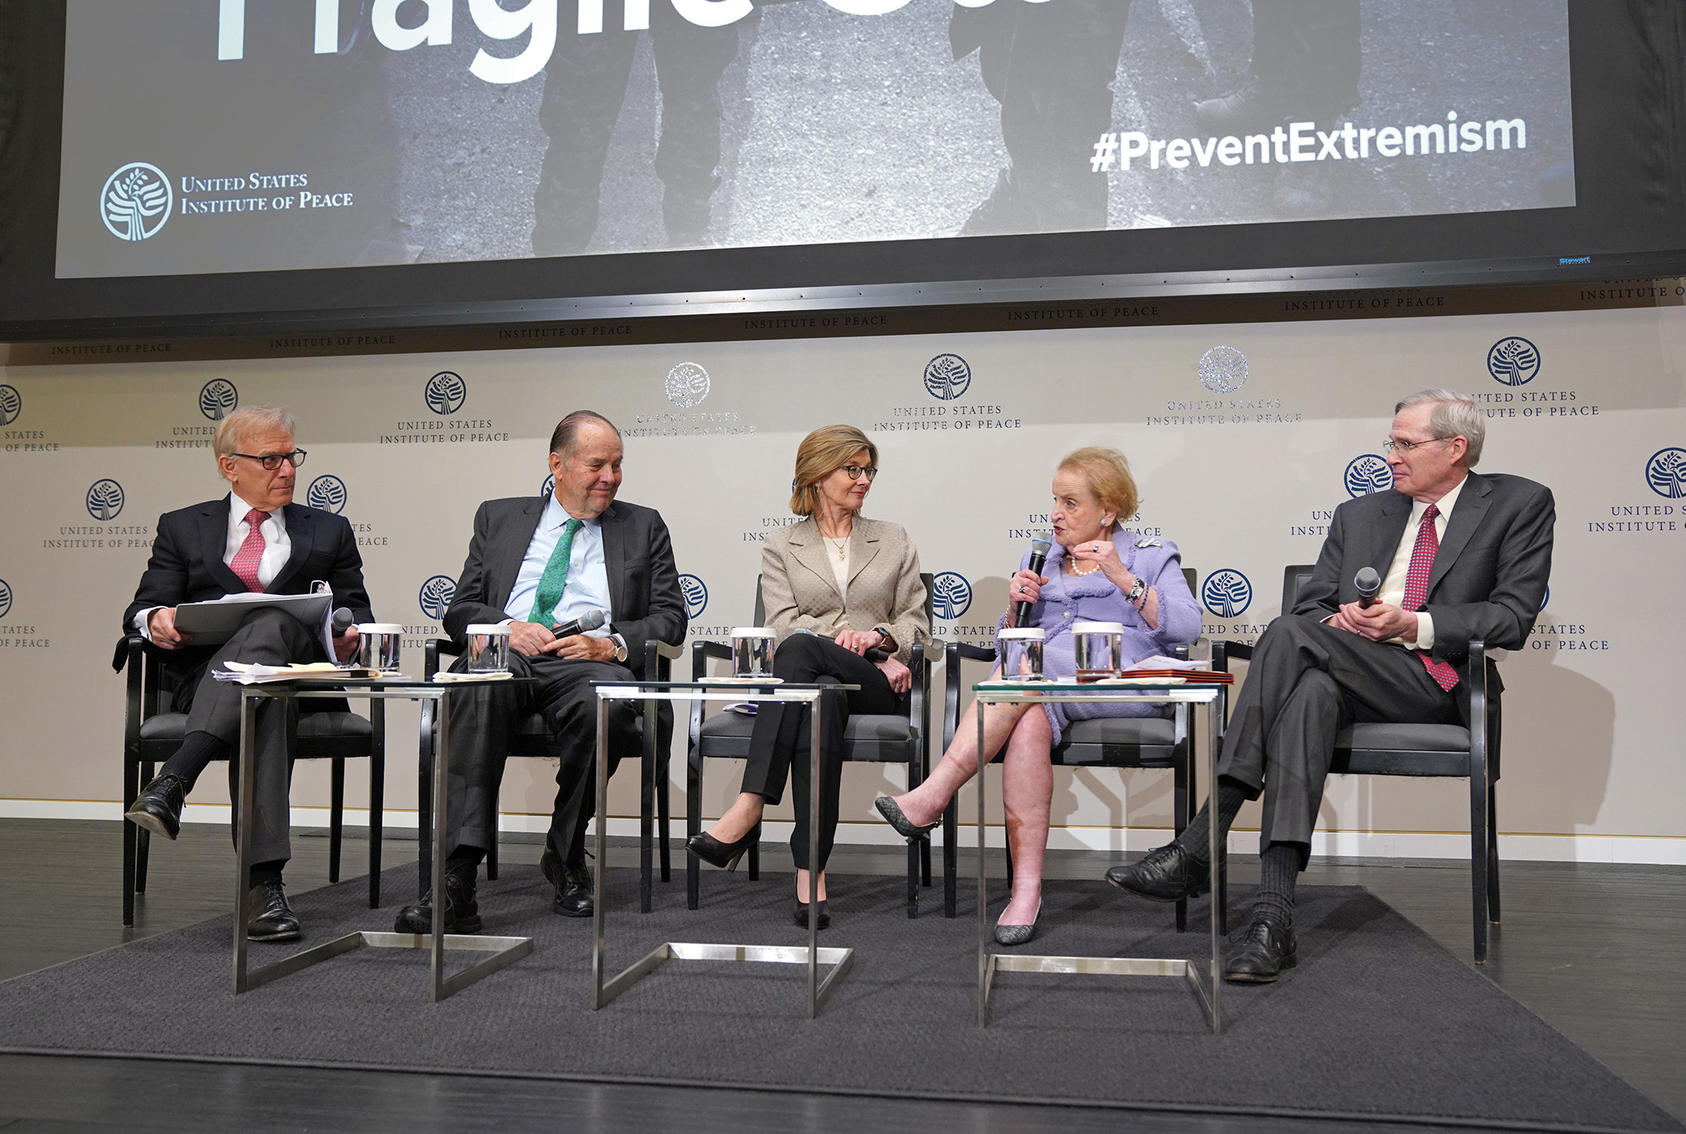 (Left to Right) The Washington Post’s David Ignatius, Task Force Co-Chair Governor Tom Kean, and Task Force members USIP President Nancy Lindborg, Sec. Madeline Albright, and Chair of the USIP Board of Directors Stephen J. Hadley at USIP on April 25, 2019. 